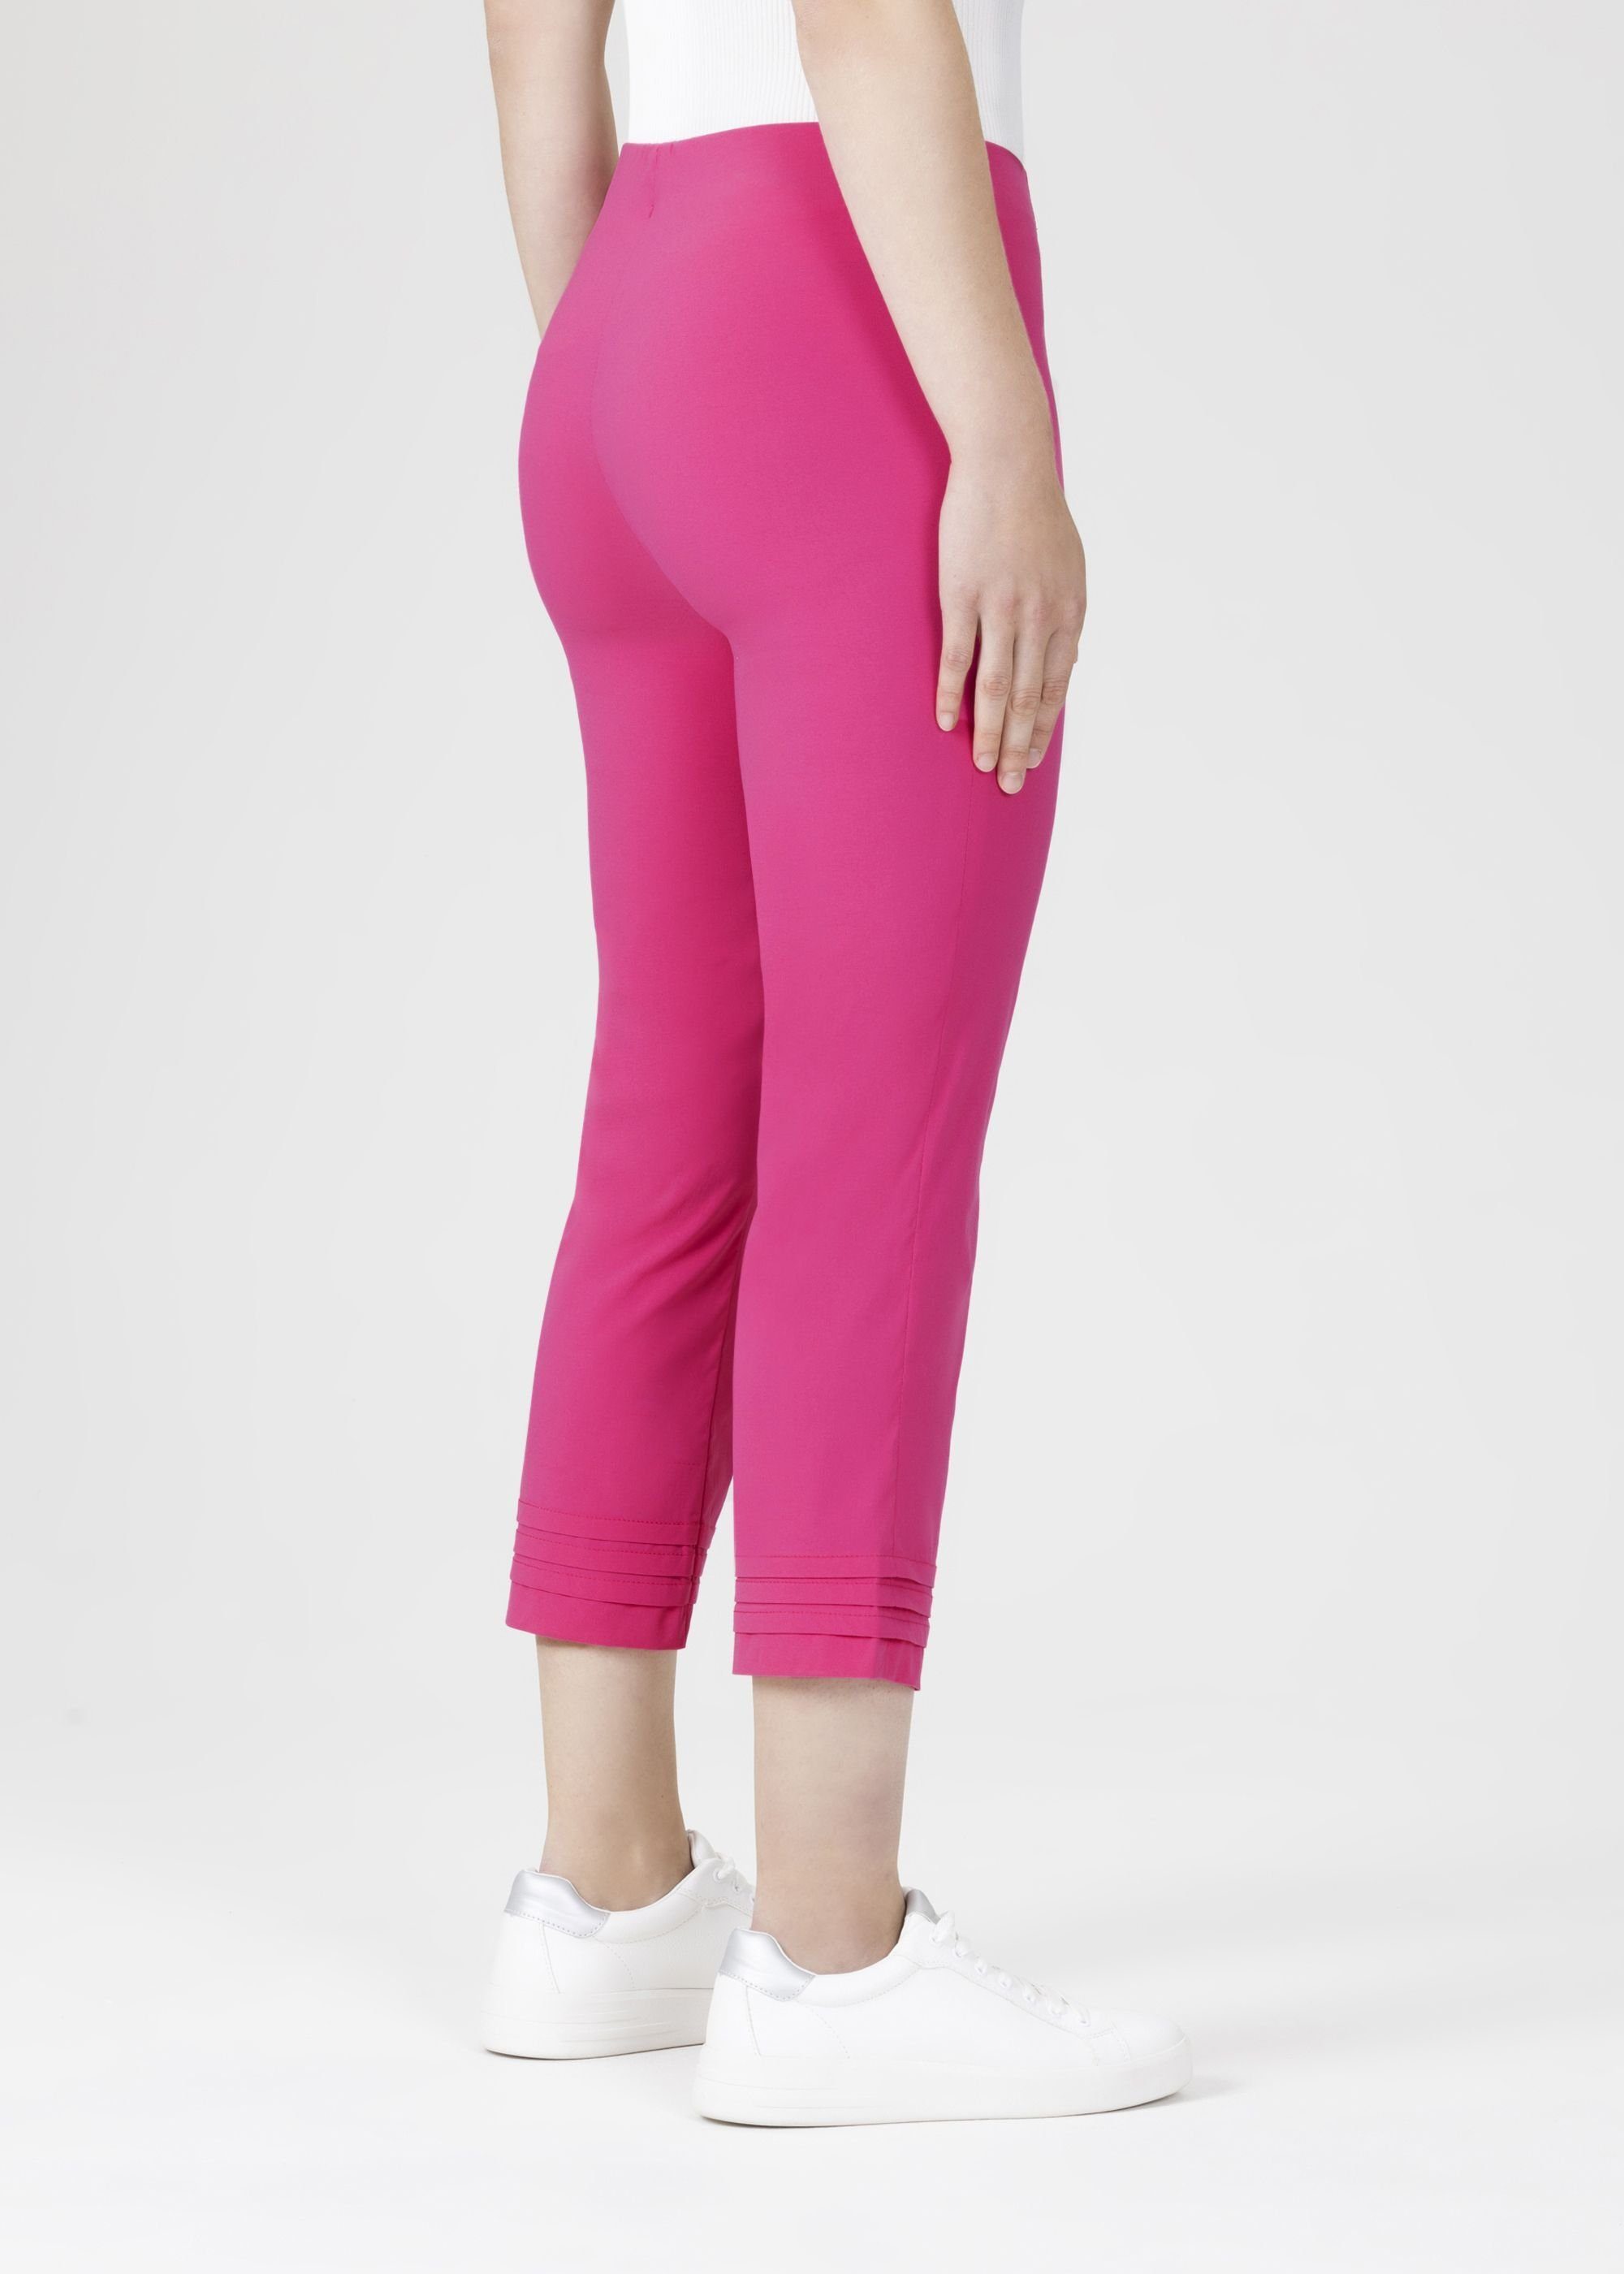 Stehmann Stoffhose Ina fuxia fluo Faltendetails mit